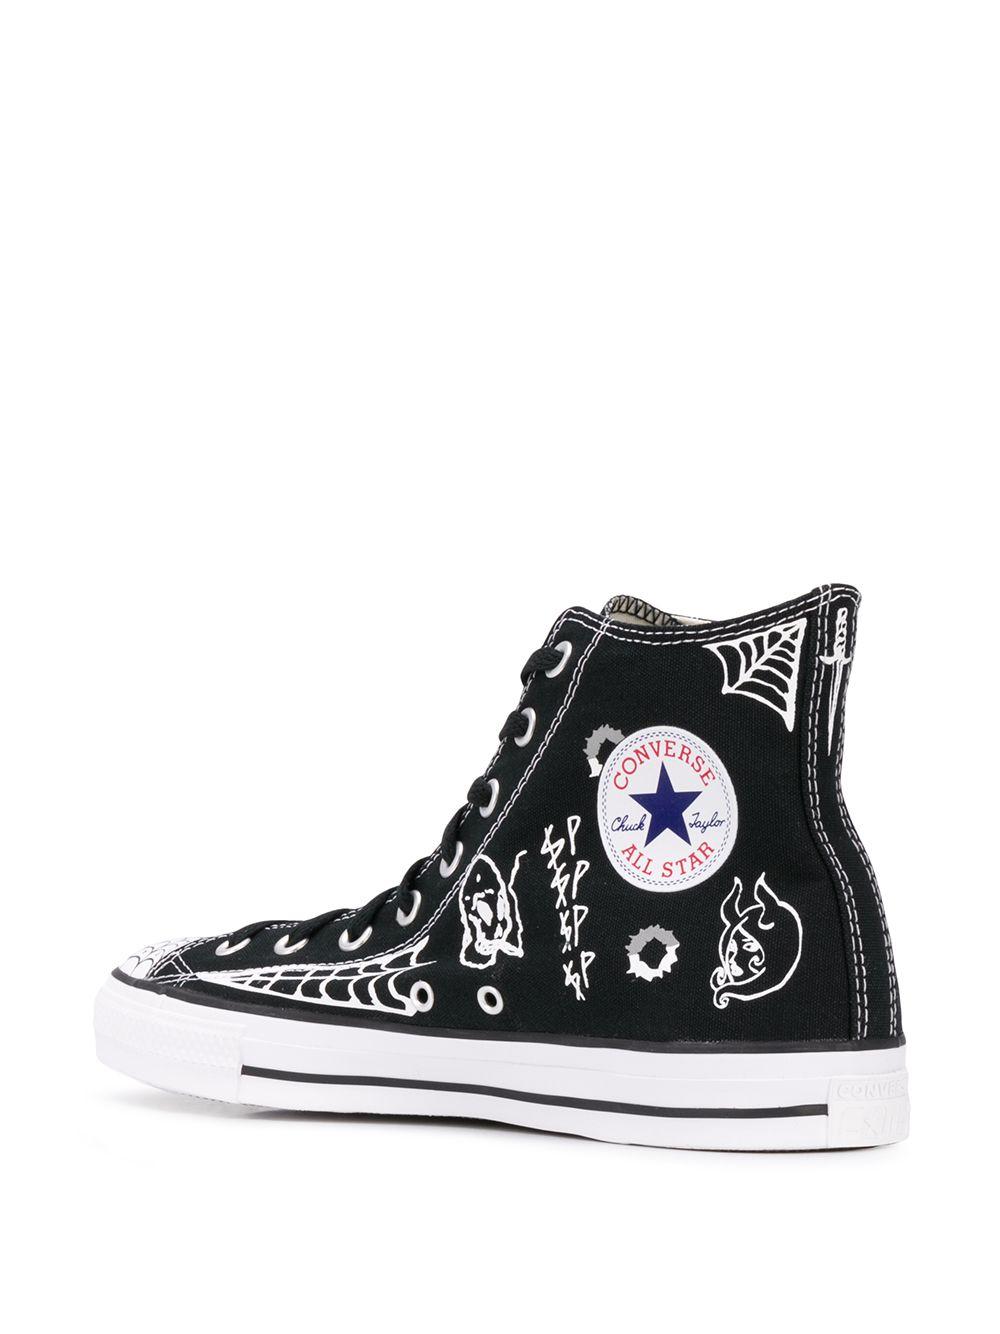 Converse Cotton Spiderweb Print Chuck Taylor Sneakers in Black for Men |  Lyst